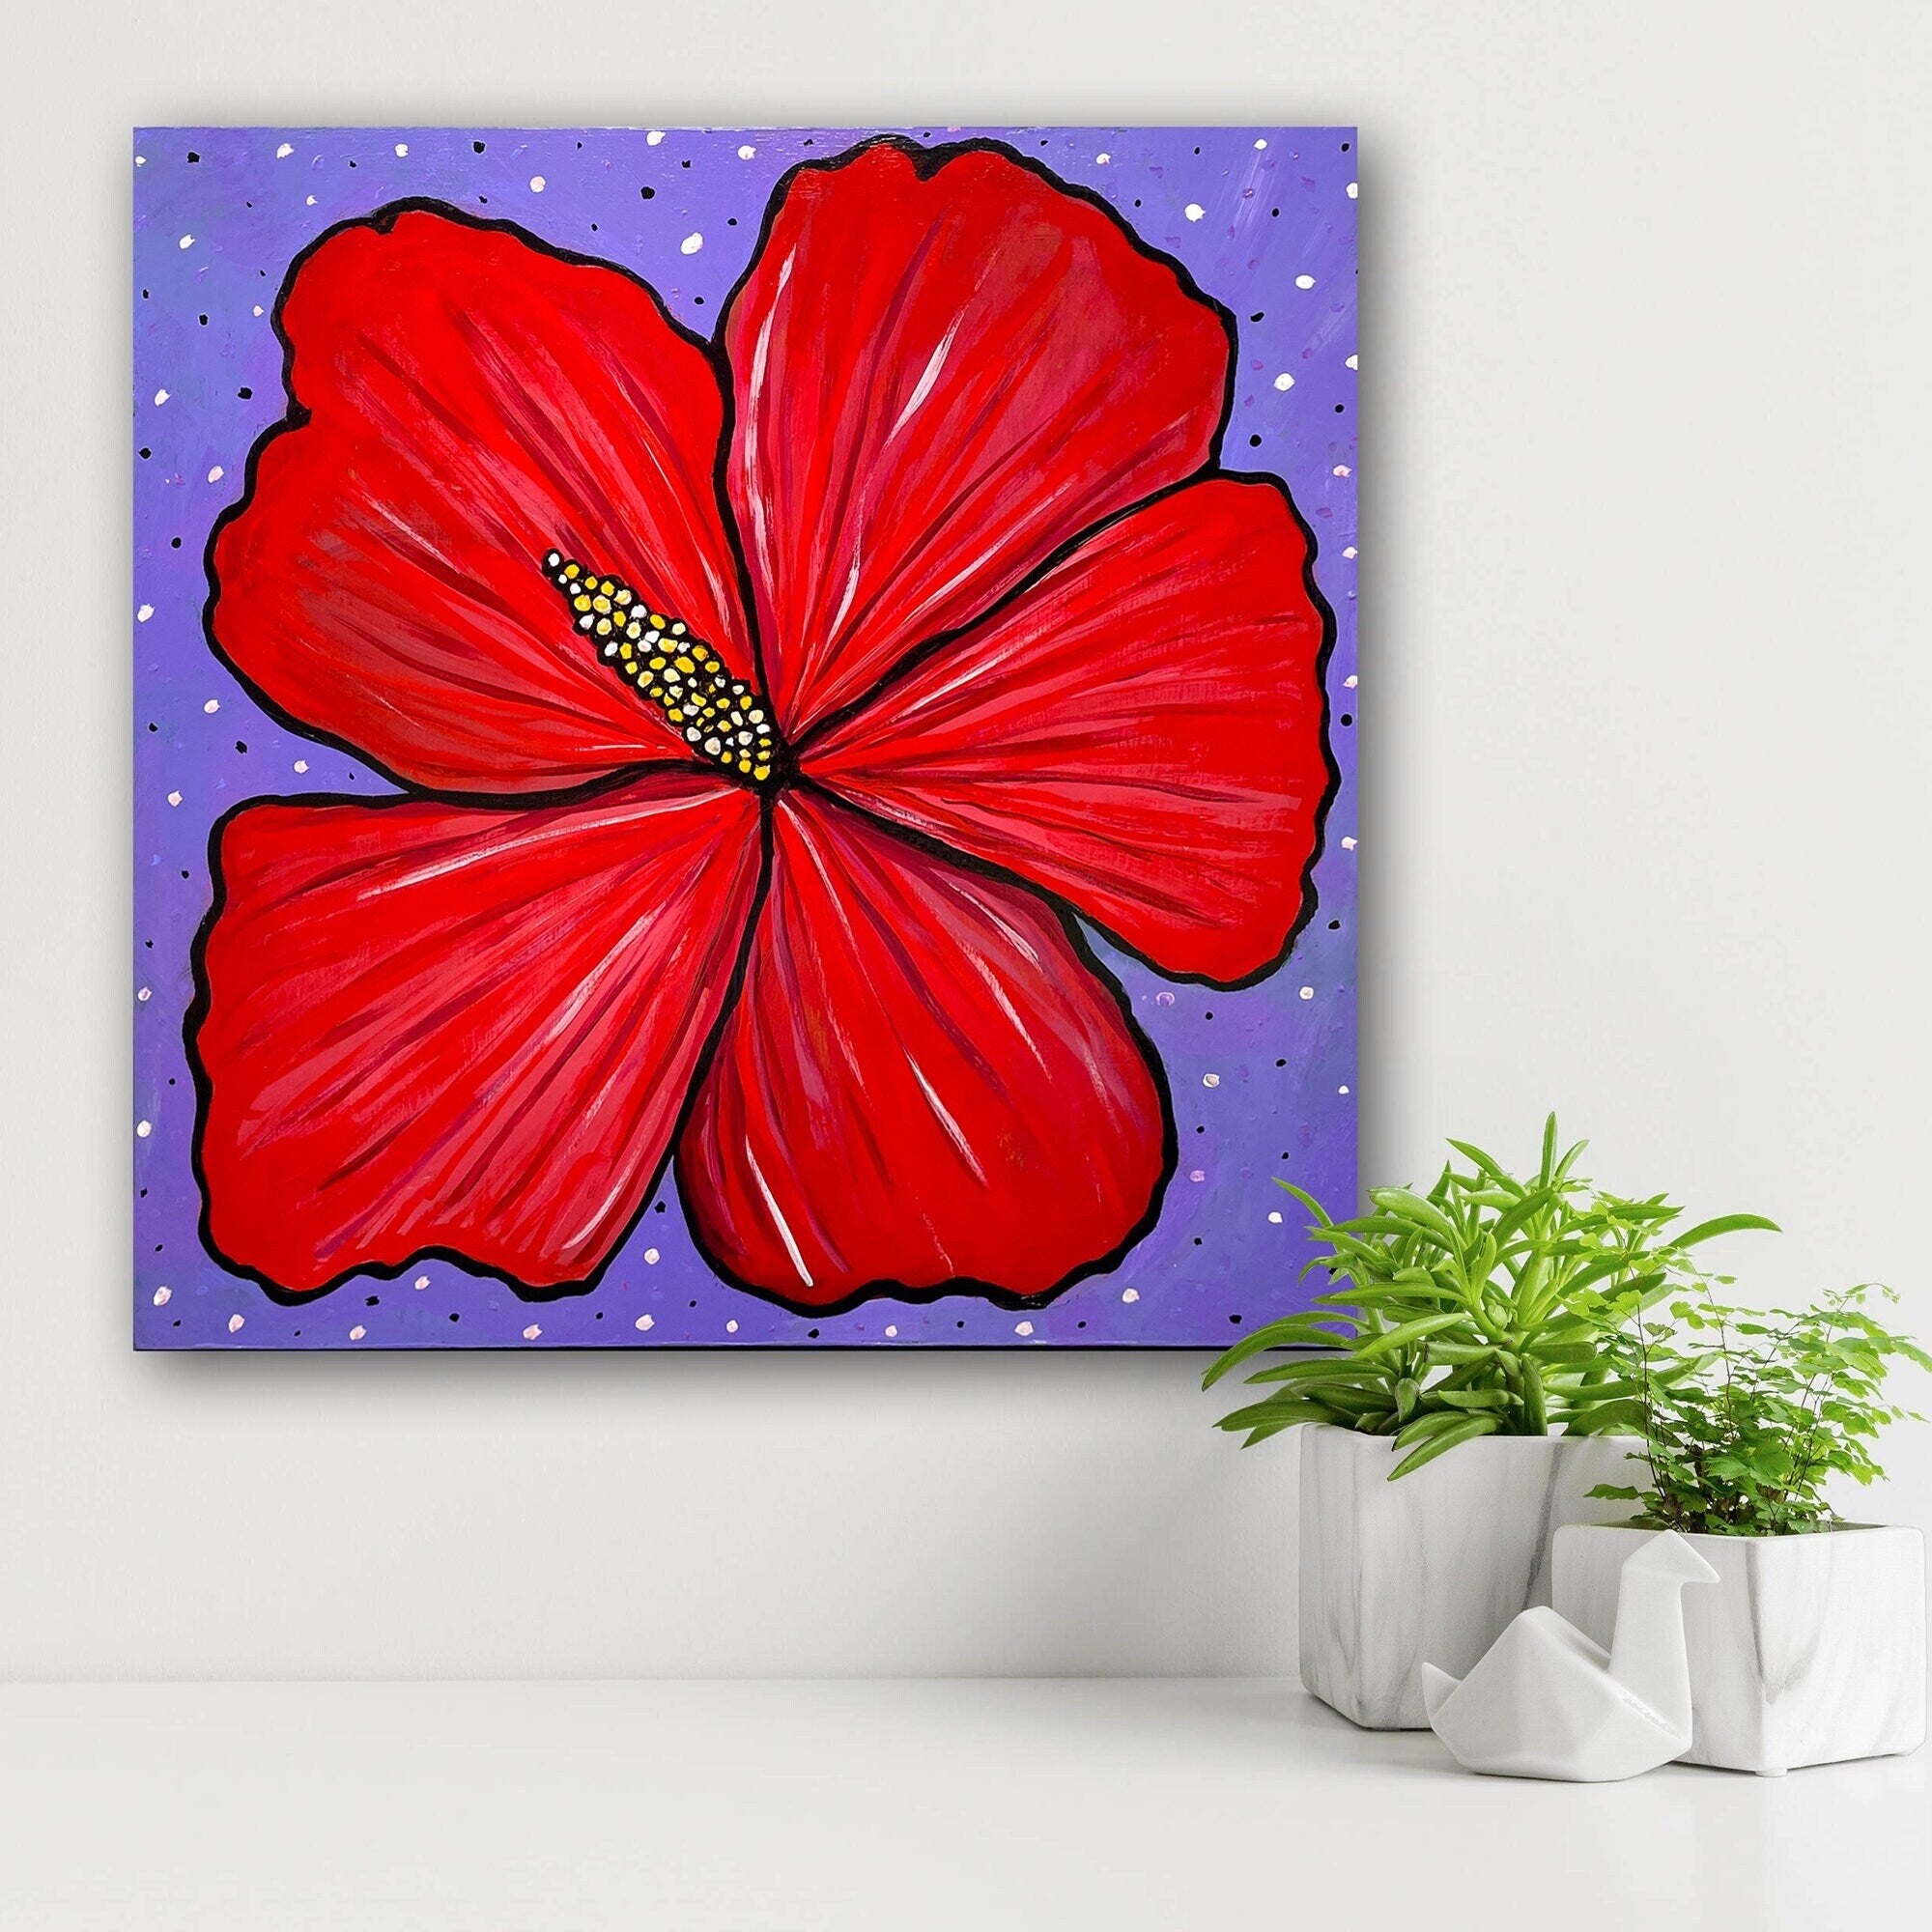 Red Hibiscus Flower Painting - Original Square Floral Art - Red, Purple, and Yellow - 12 x 12 inches